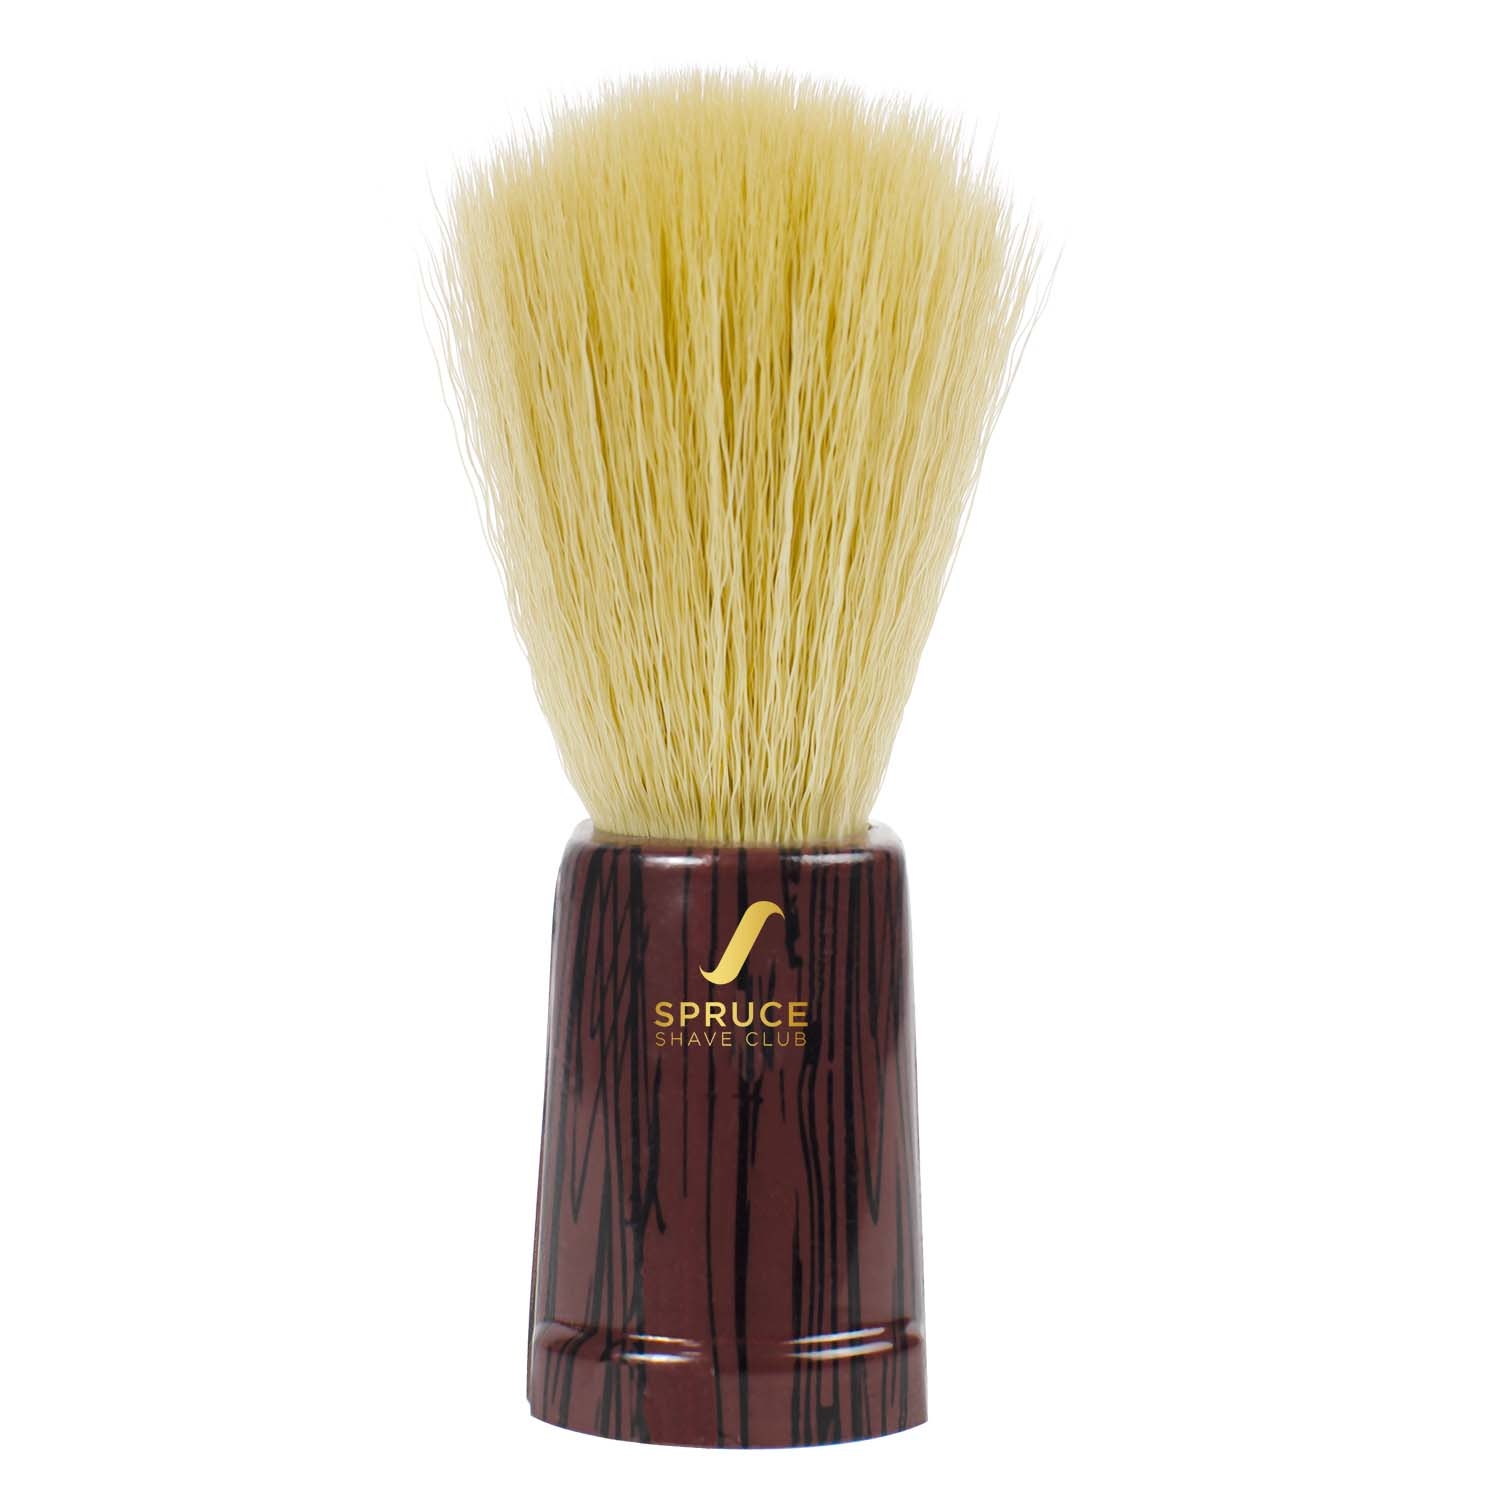 Spruce Shave Club | Spruce Shave Club Shaving Brush For Men with Wooden Finish Handle | Ultra Soft Shaving Brush Nick Free Shave | Make a Rich Lather for Easier Razor Glide | Ultra Absorbent & Gentle on Skin